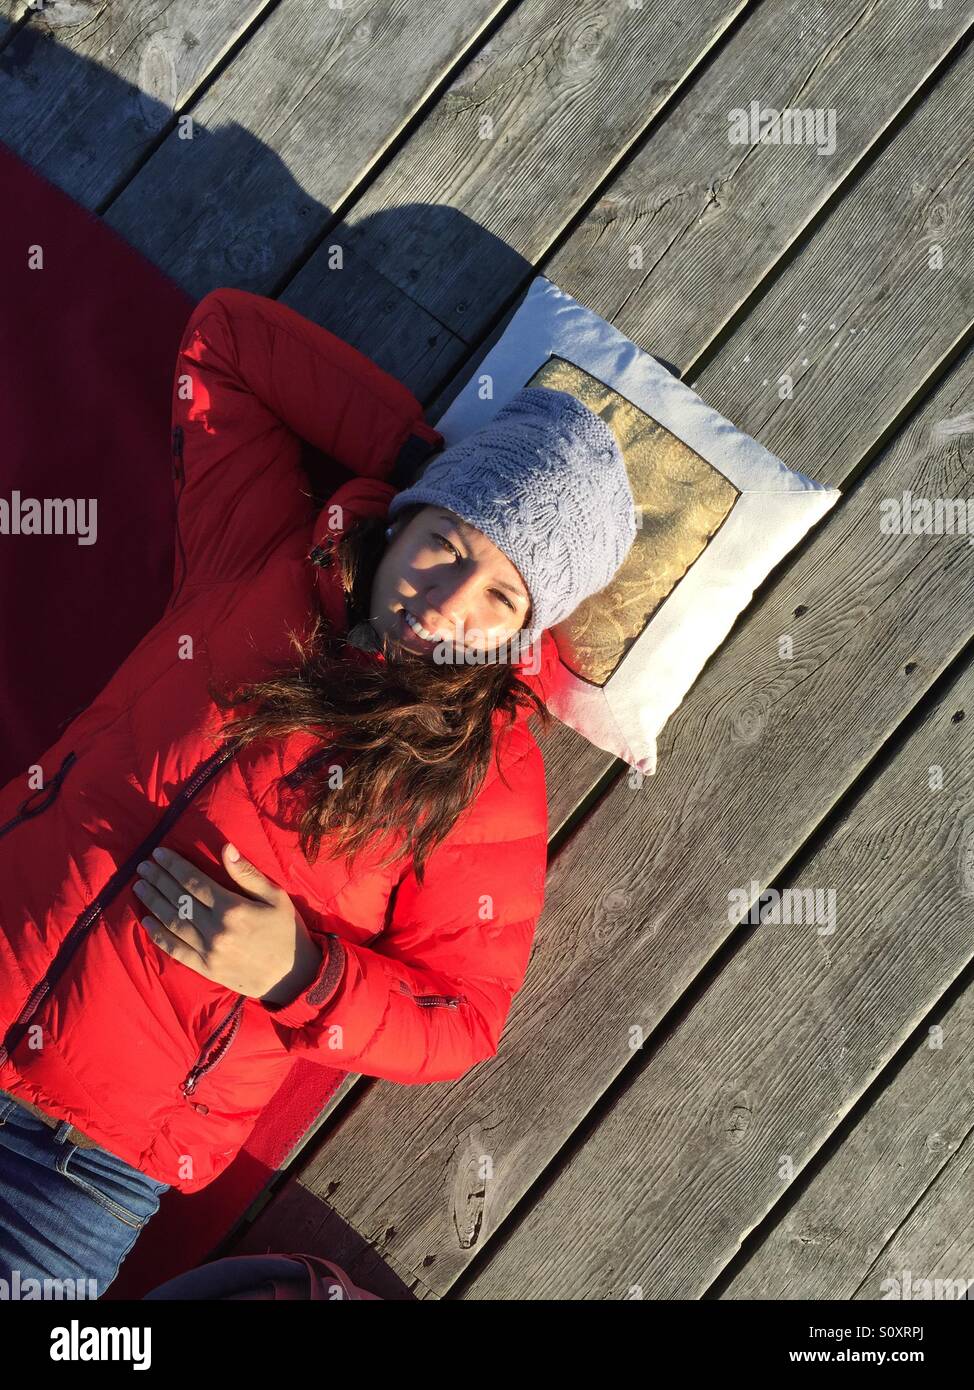 A girl dressed in blue jeans, red jacket and grey hat faces the camera whilst lying on a deck on a sunny day in Norway. Stock Photo